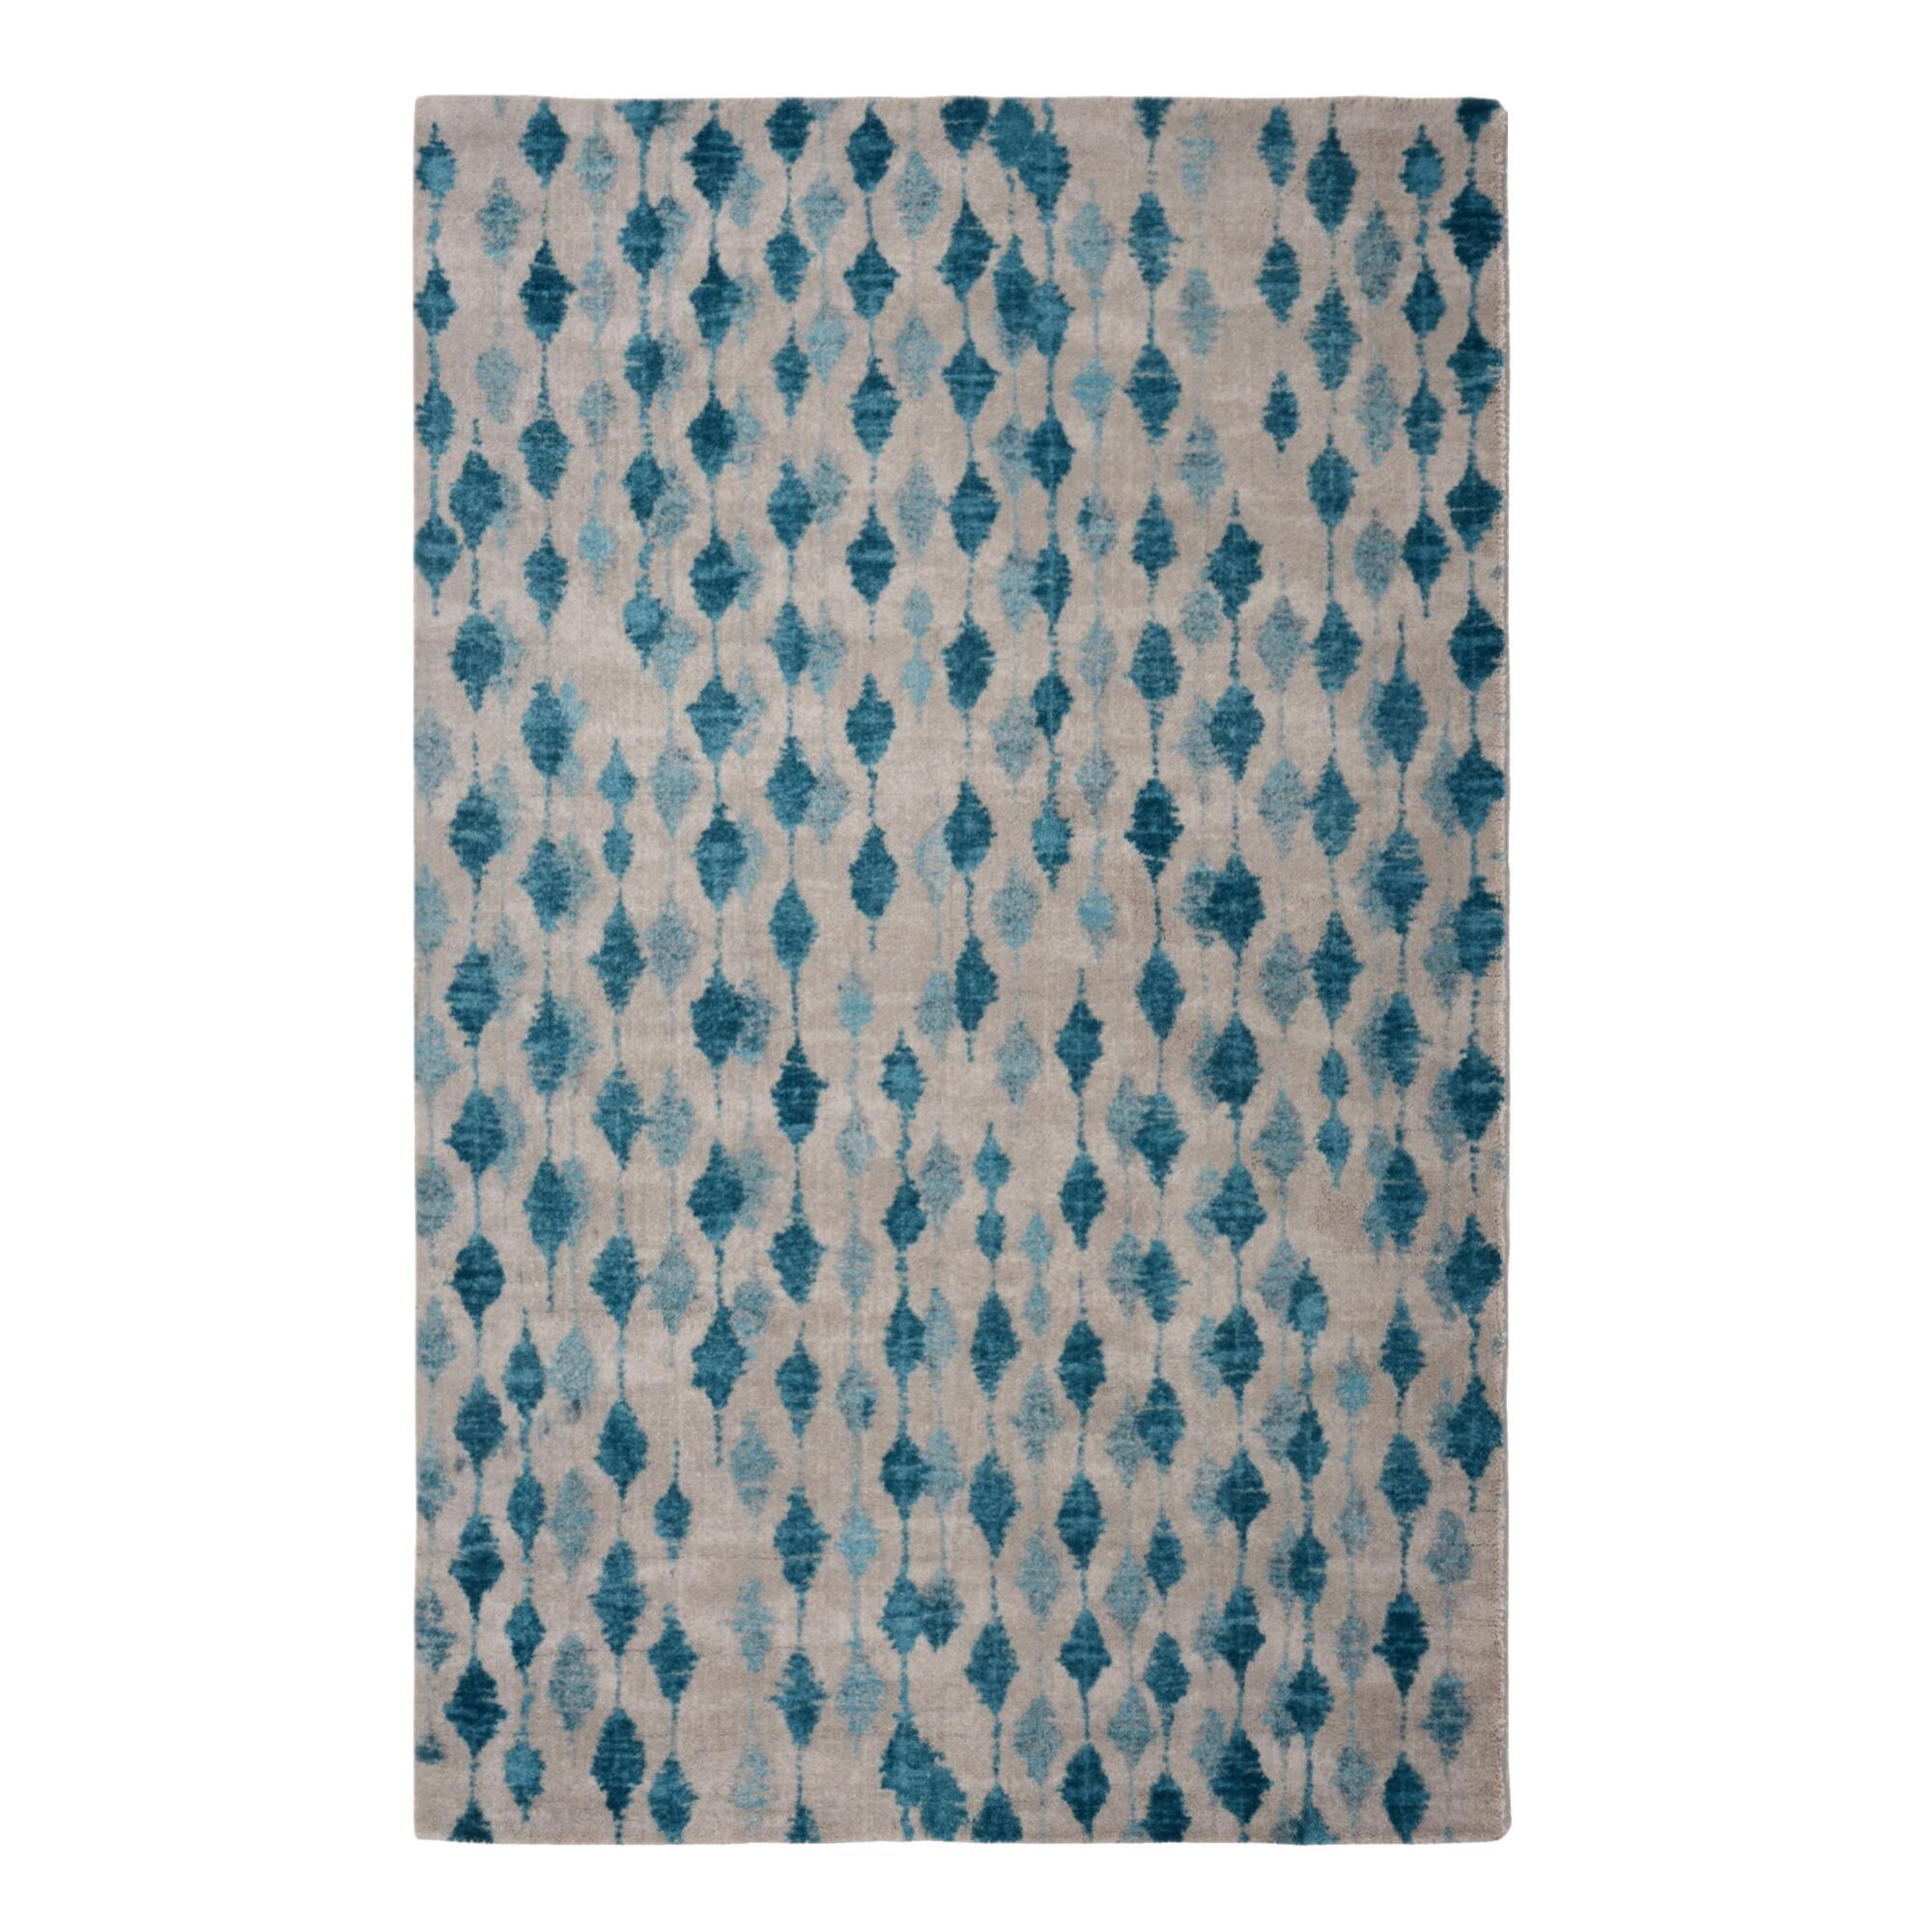 Blue and Taupe Raindrops Area Rug - Nylon - 8' x 10' by World Market